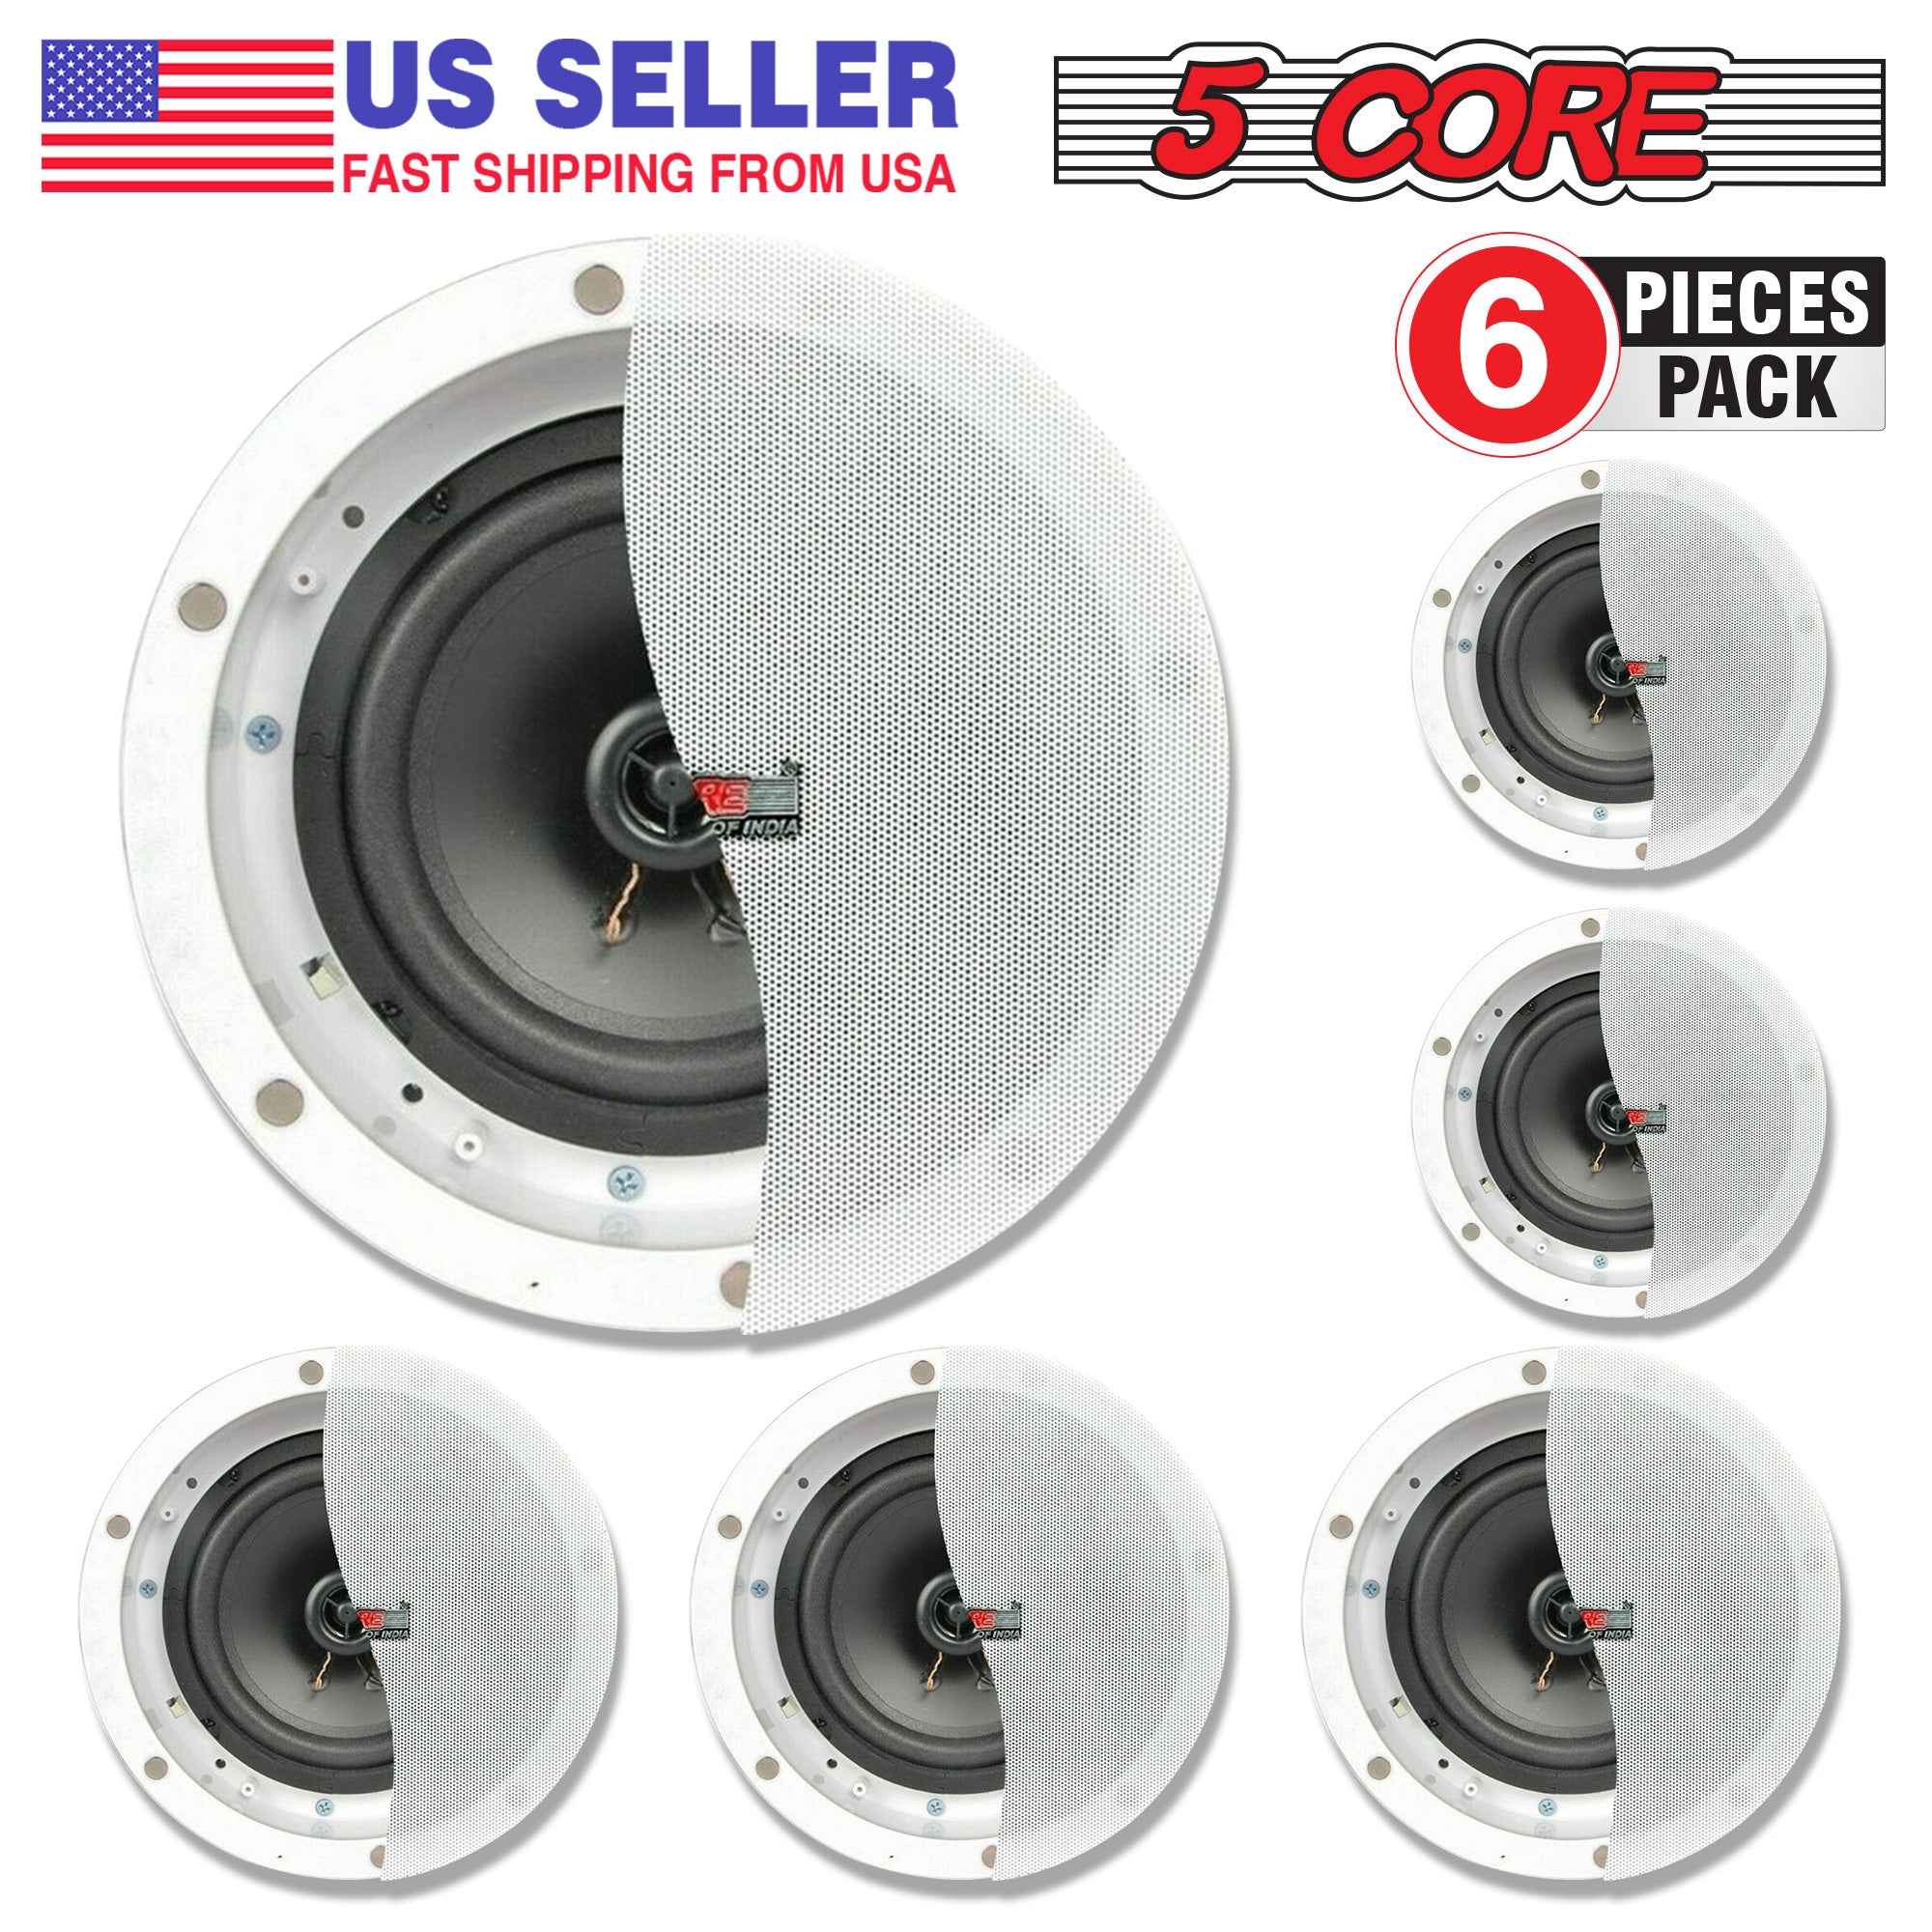 5 Core 6.5 Inch Ceiling Speaker System White in Wall Speakers 20W Rated Power 88dB Sensitivity Indoor Outdoor Ceiling Mount -CL 6.5-12 2W 6PCS